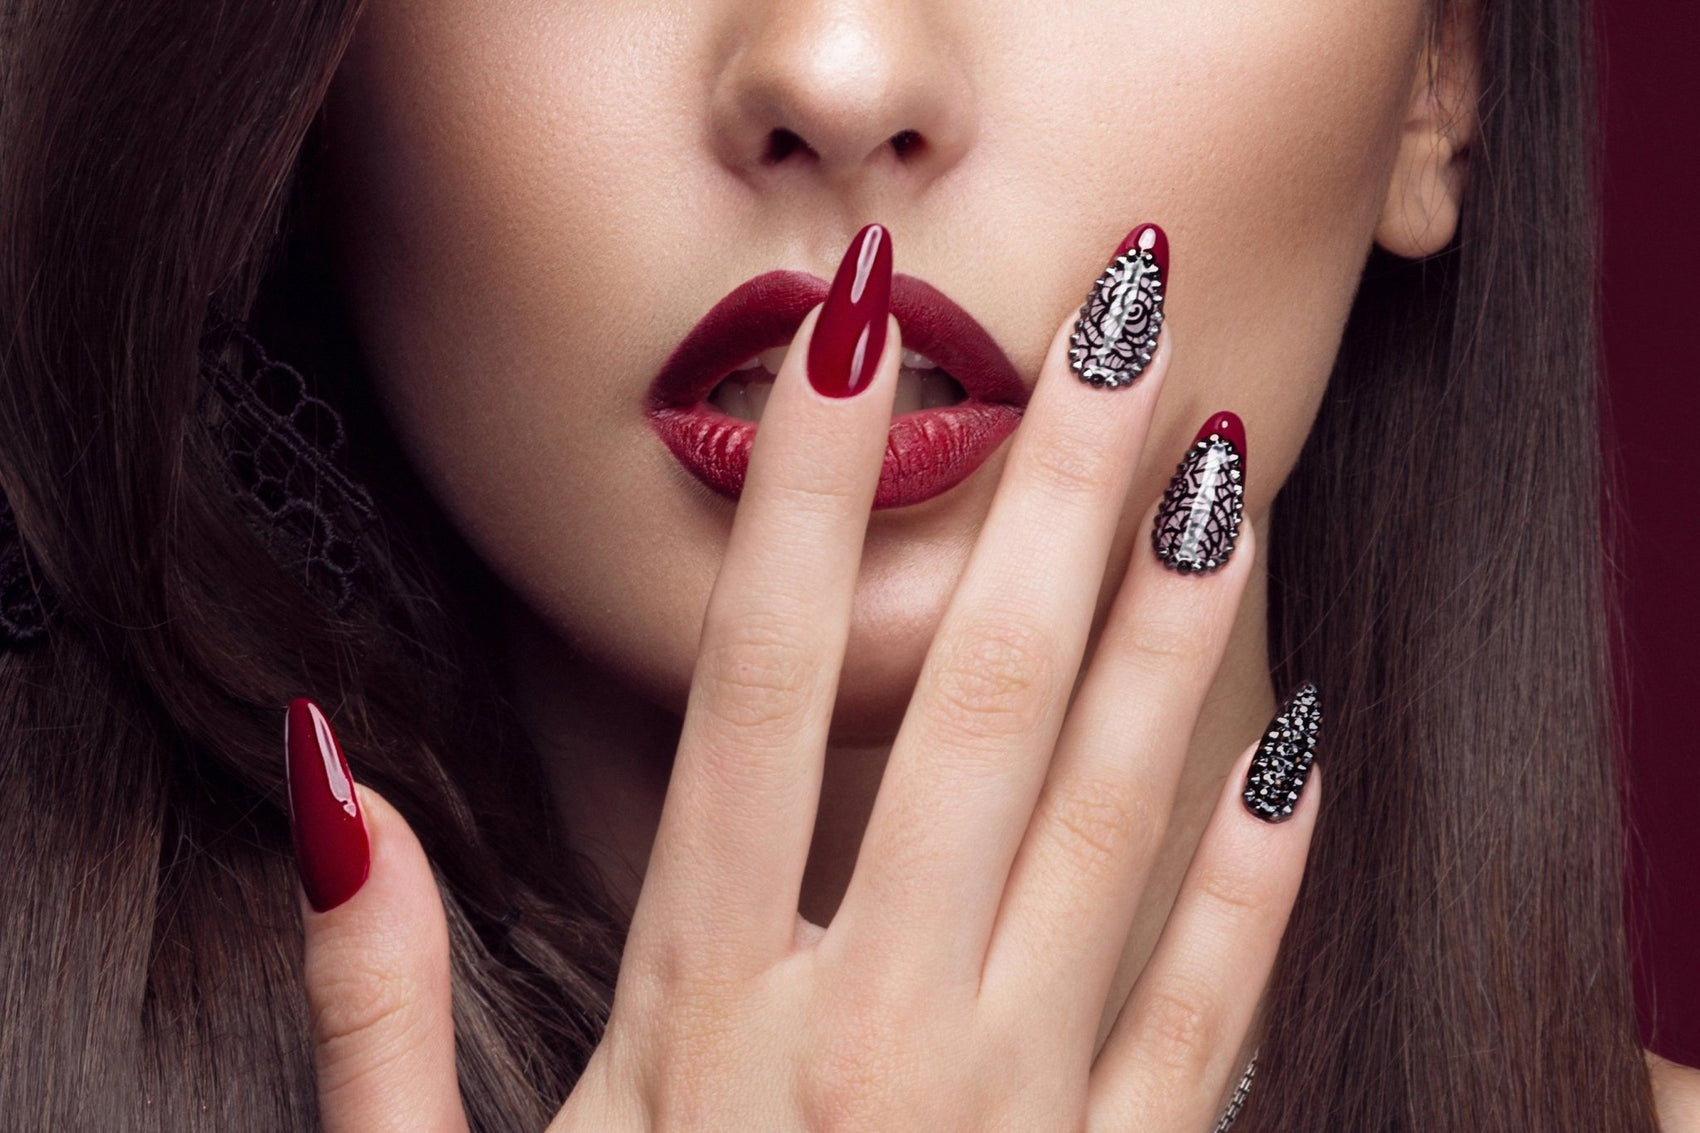 Nail Salons: how to get your customers to try something new | Chroma Gel